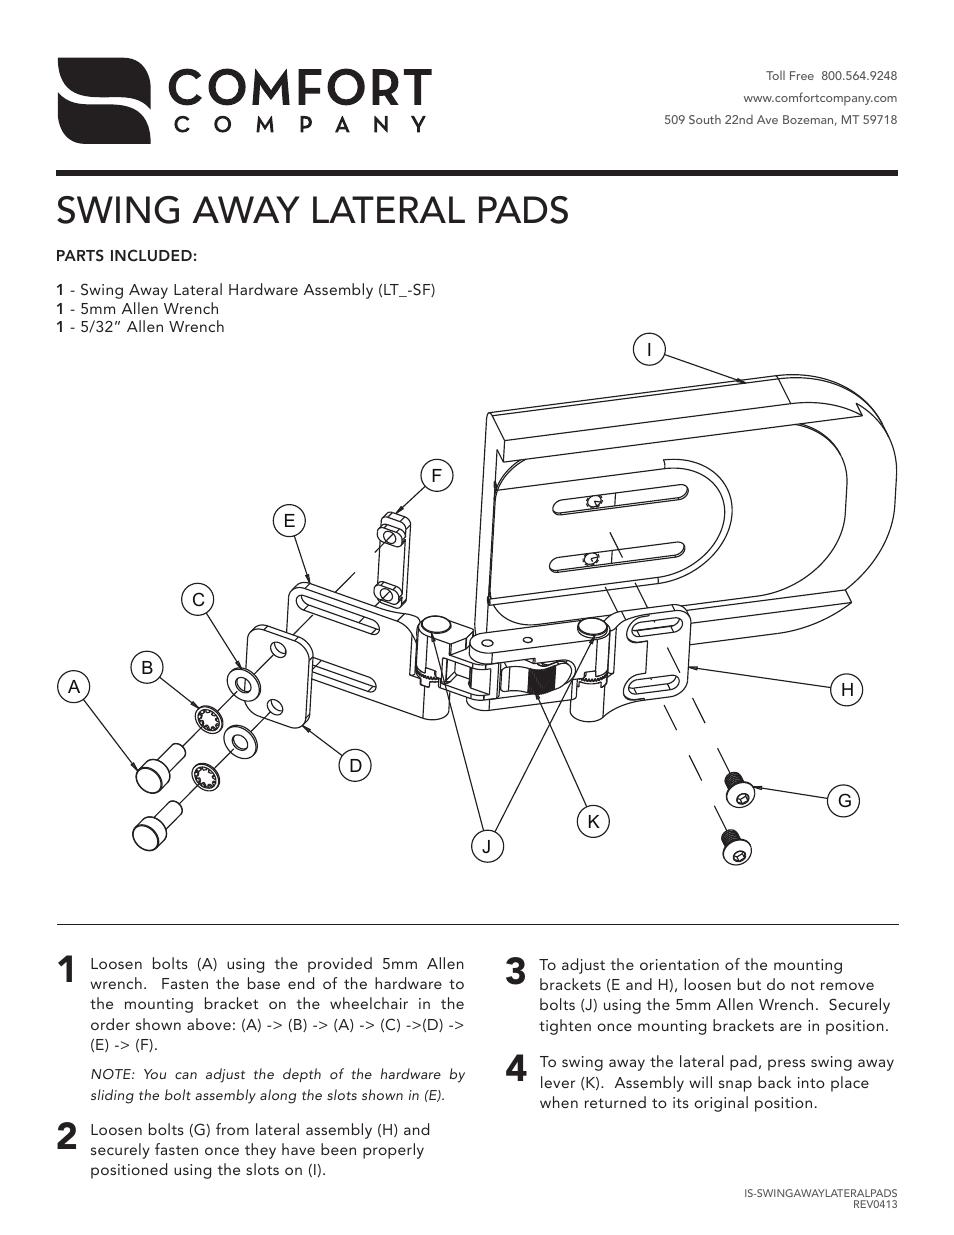 Swing-Away Lateral Pads